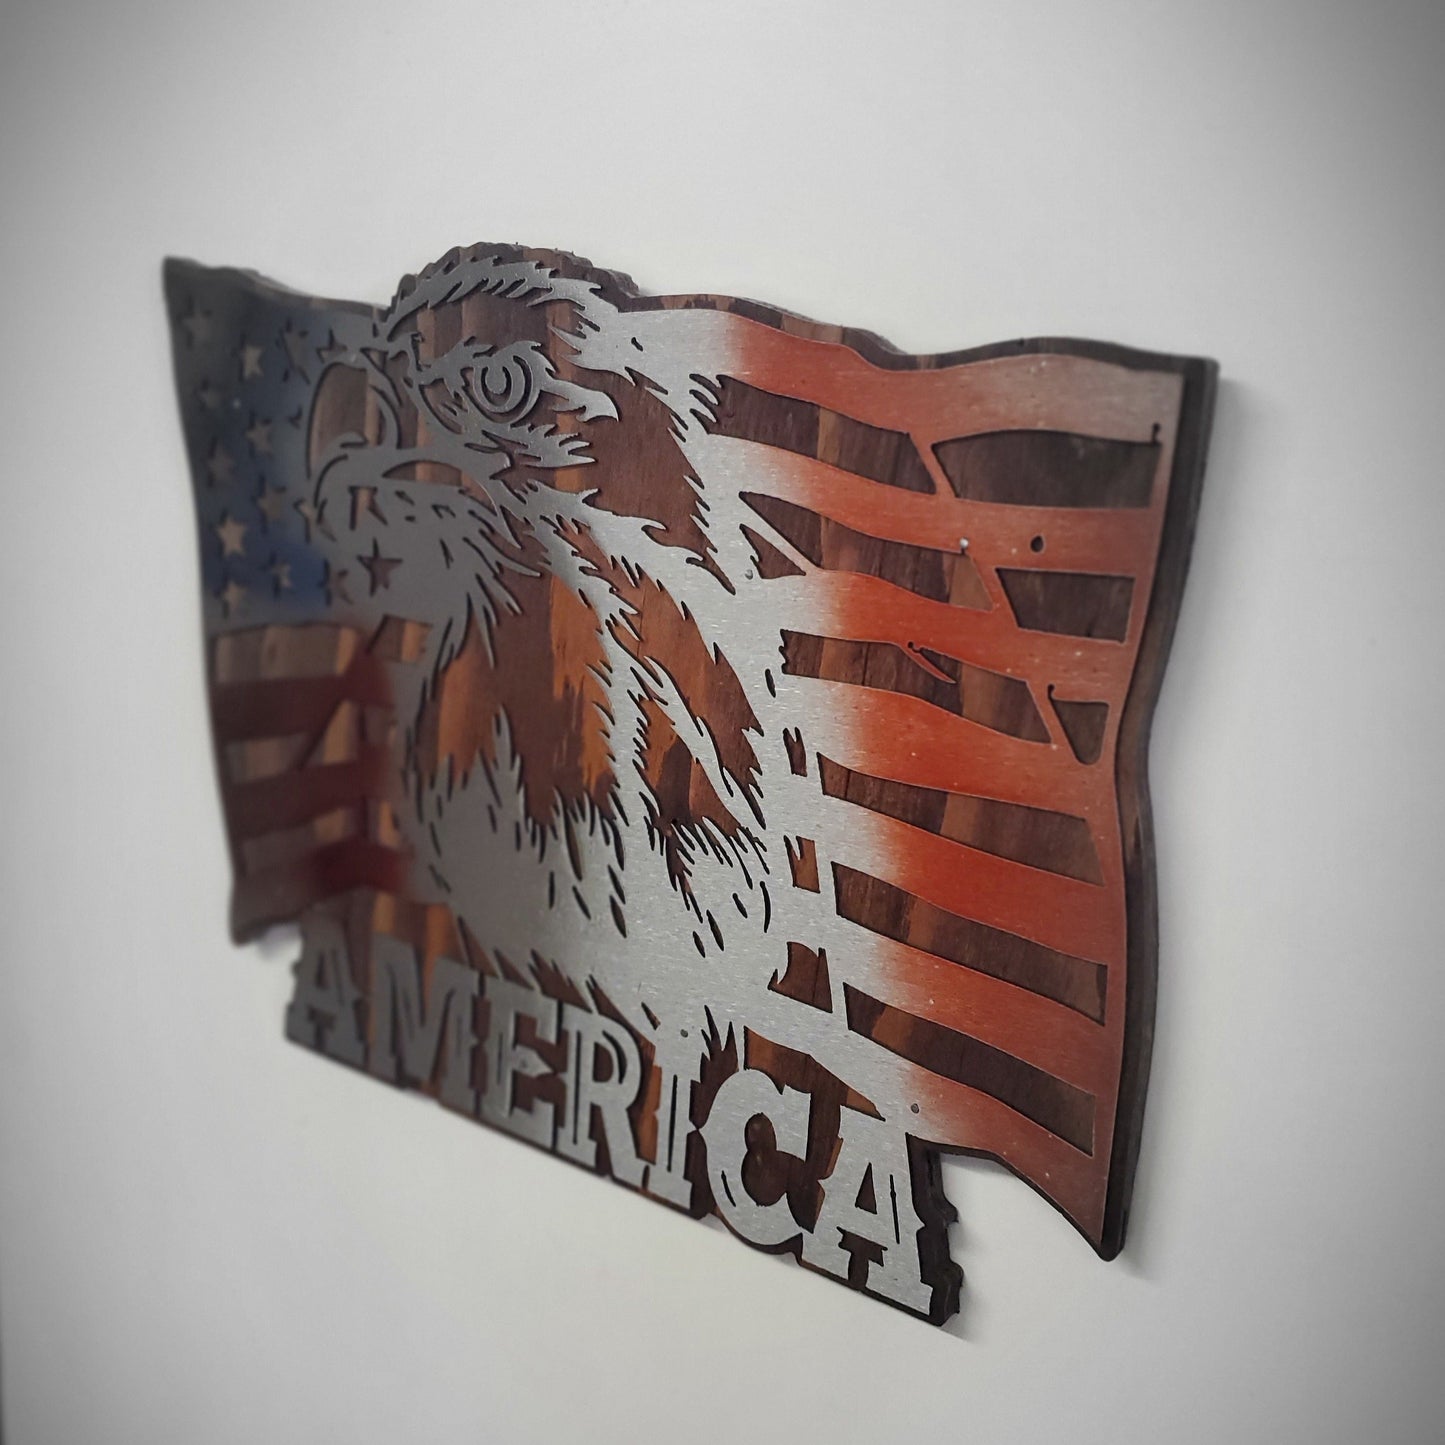 American Flag with Eagle Metal Wall Art | U.S. History Stars & Stripes Americana Wall Plaque Gift | Made in USA of Rustic Wood and Steel